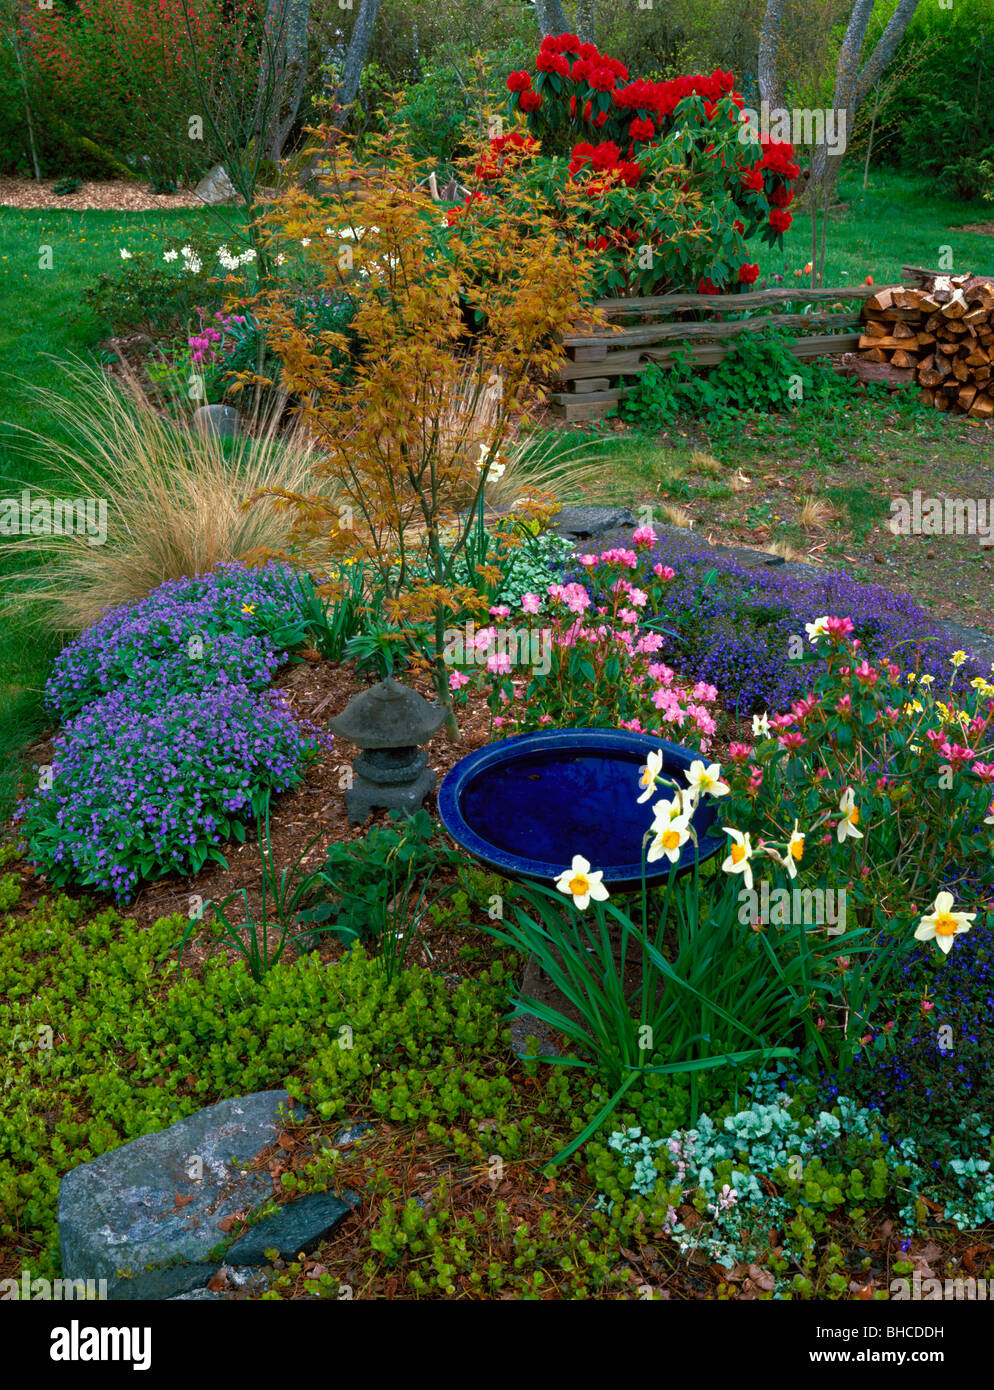 A blue bird bath rests in a garden bed with flowering daffodils, rhododendron, and various ground covers on Vashon Island, WA Stock Photo